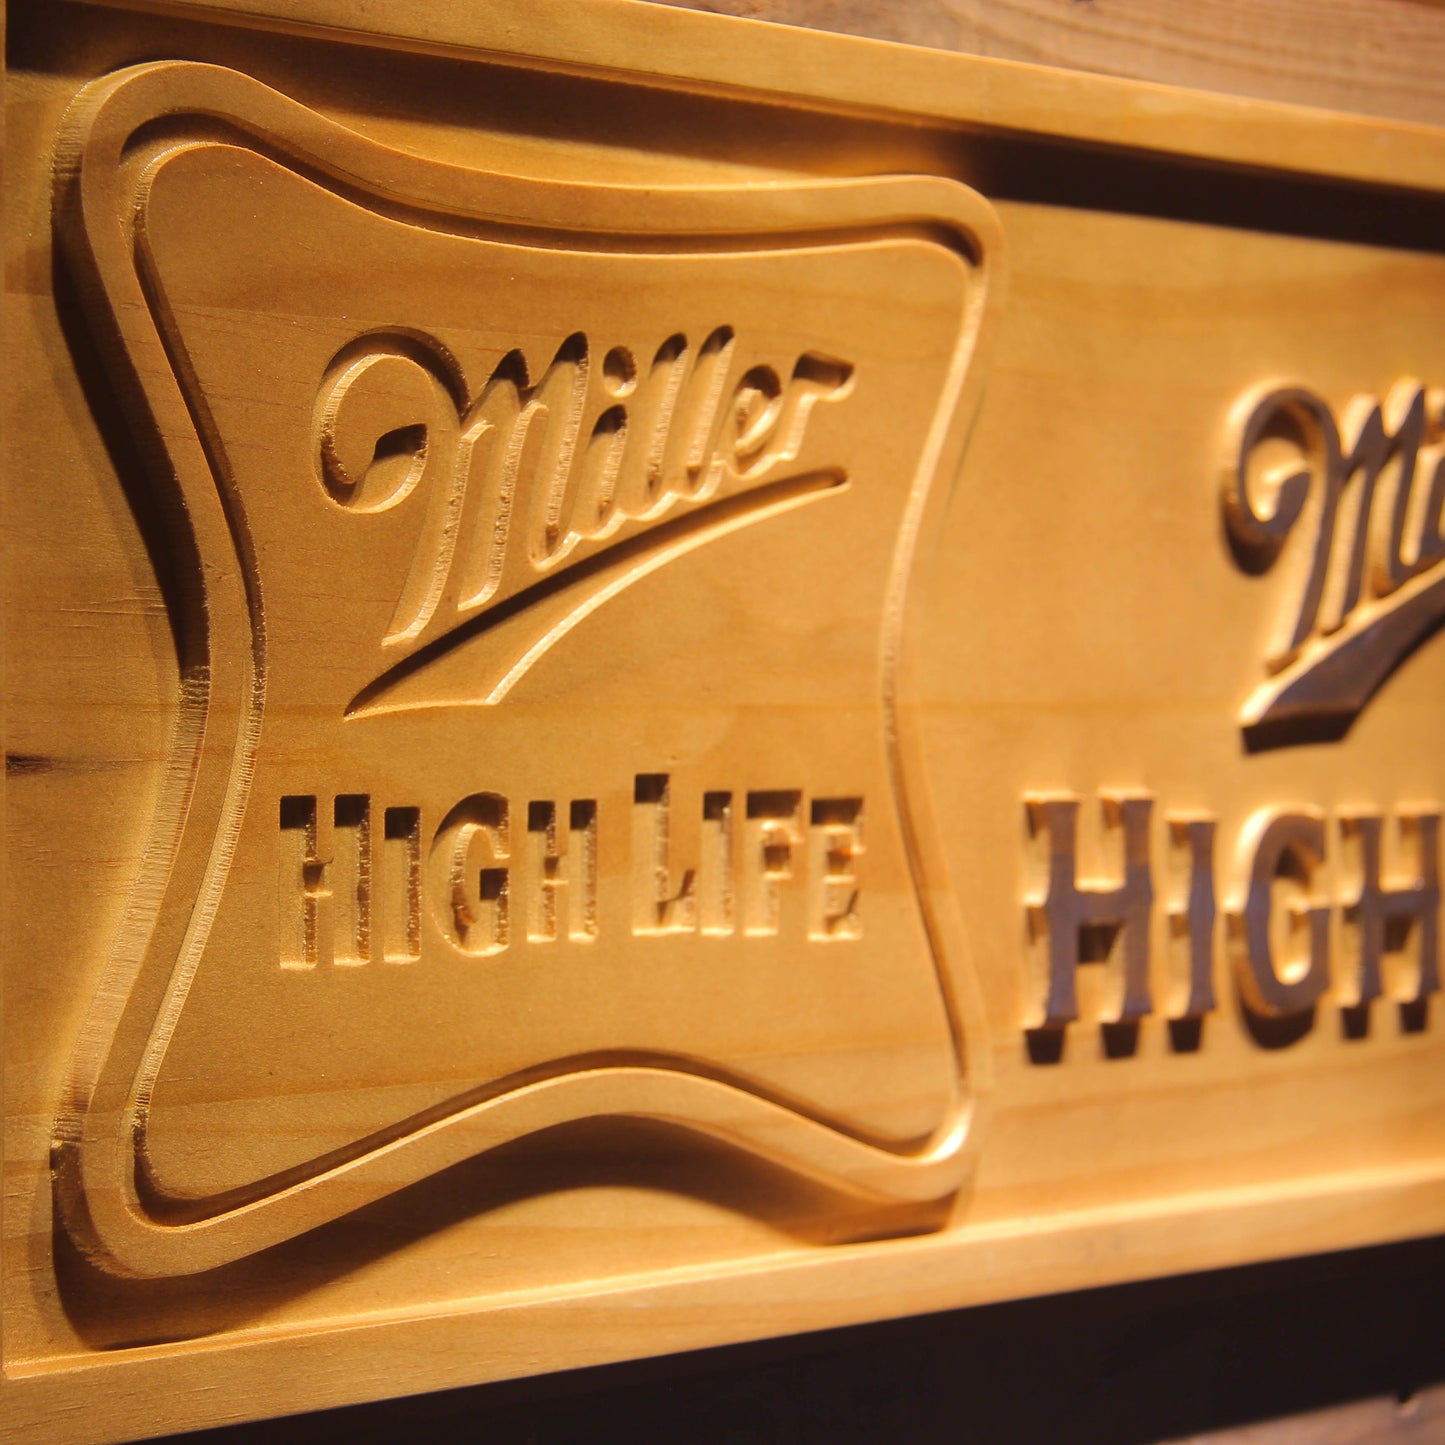 Miller High Life  3D Wooden Signs by Woody Signs Co. - Handmade Crafted Unique Wooden Creative